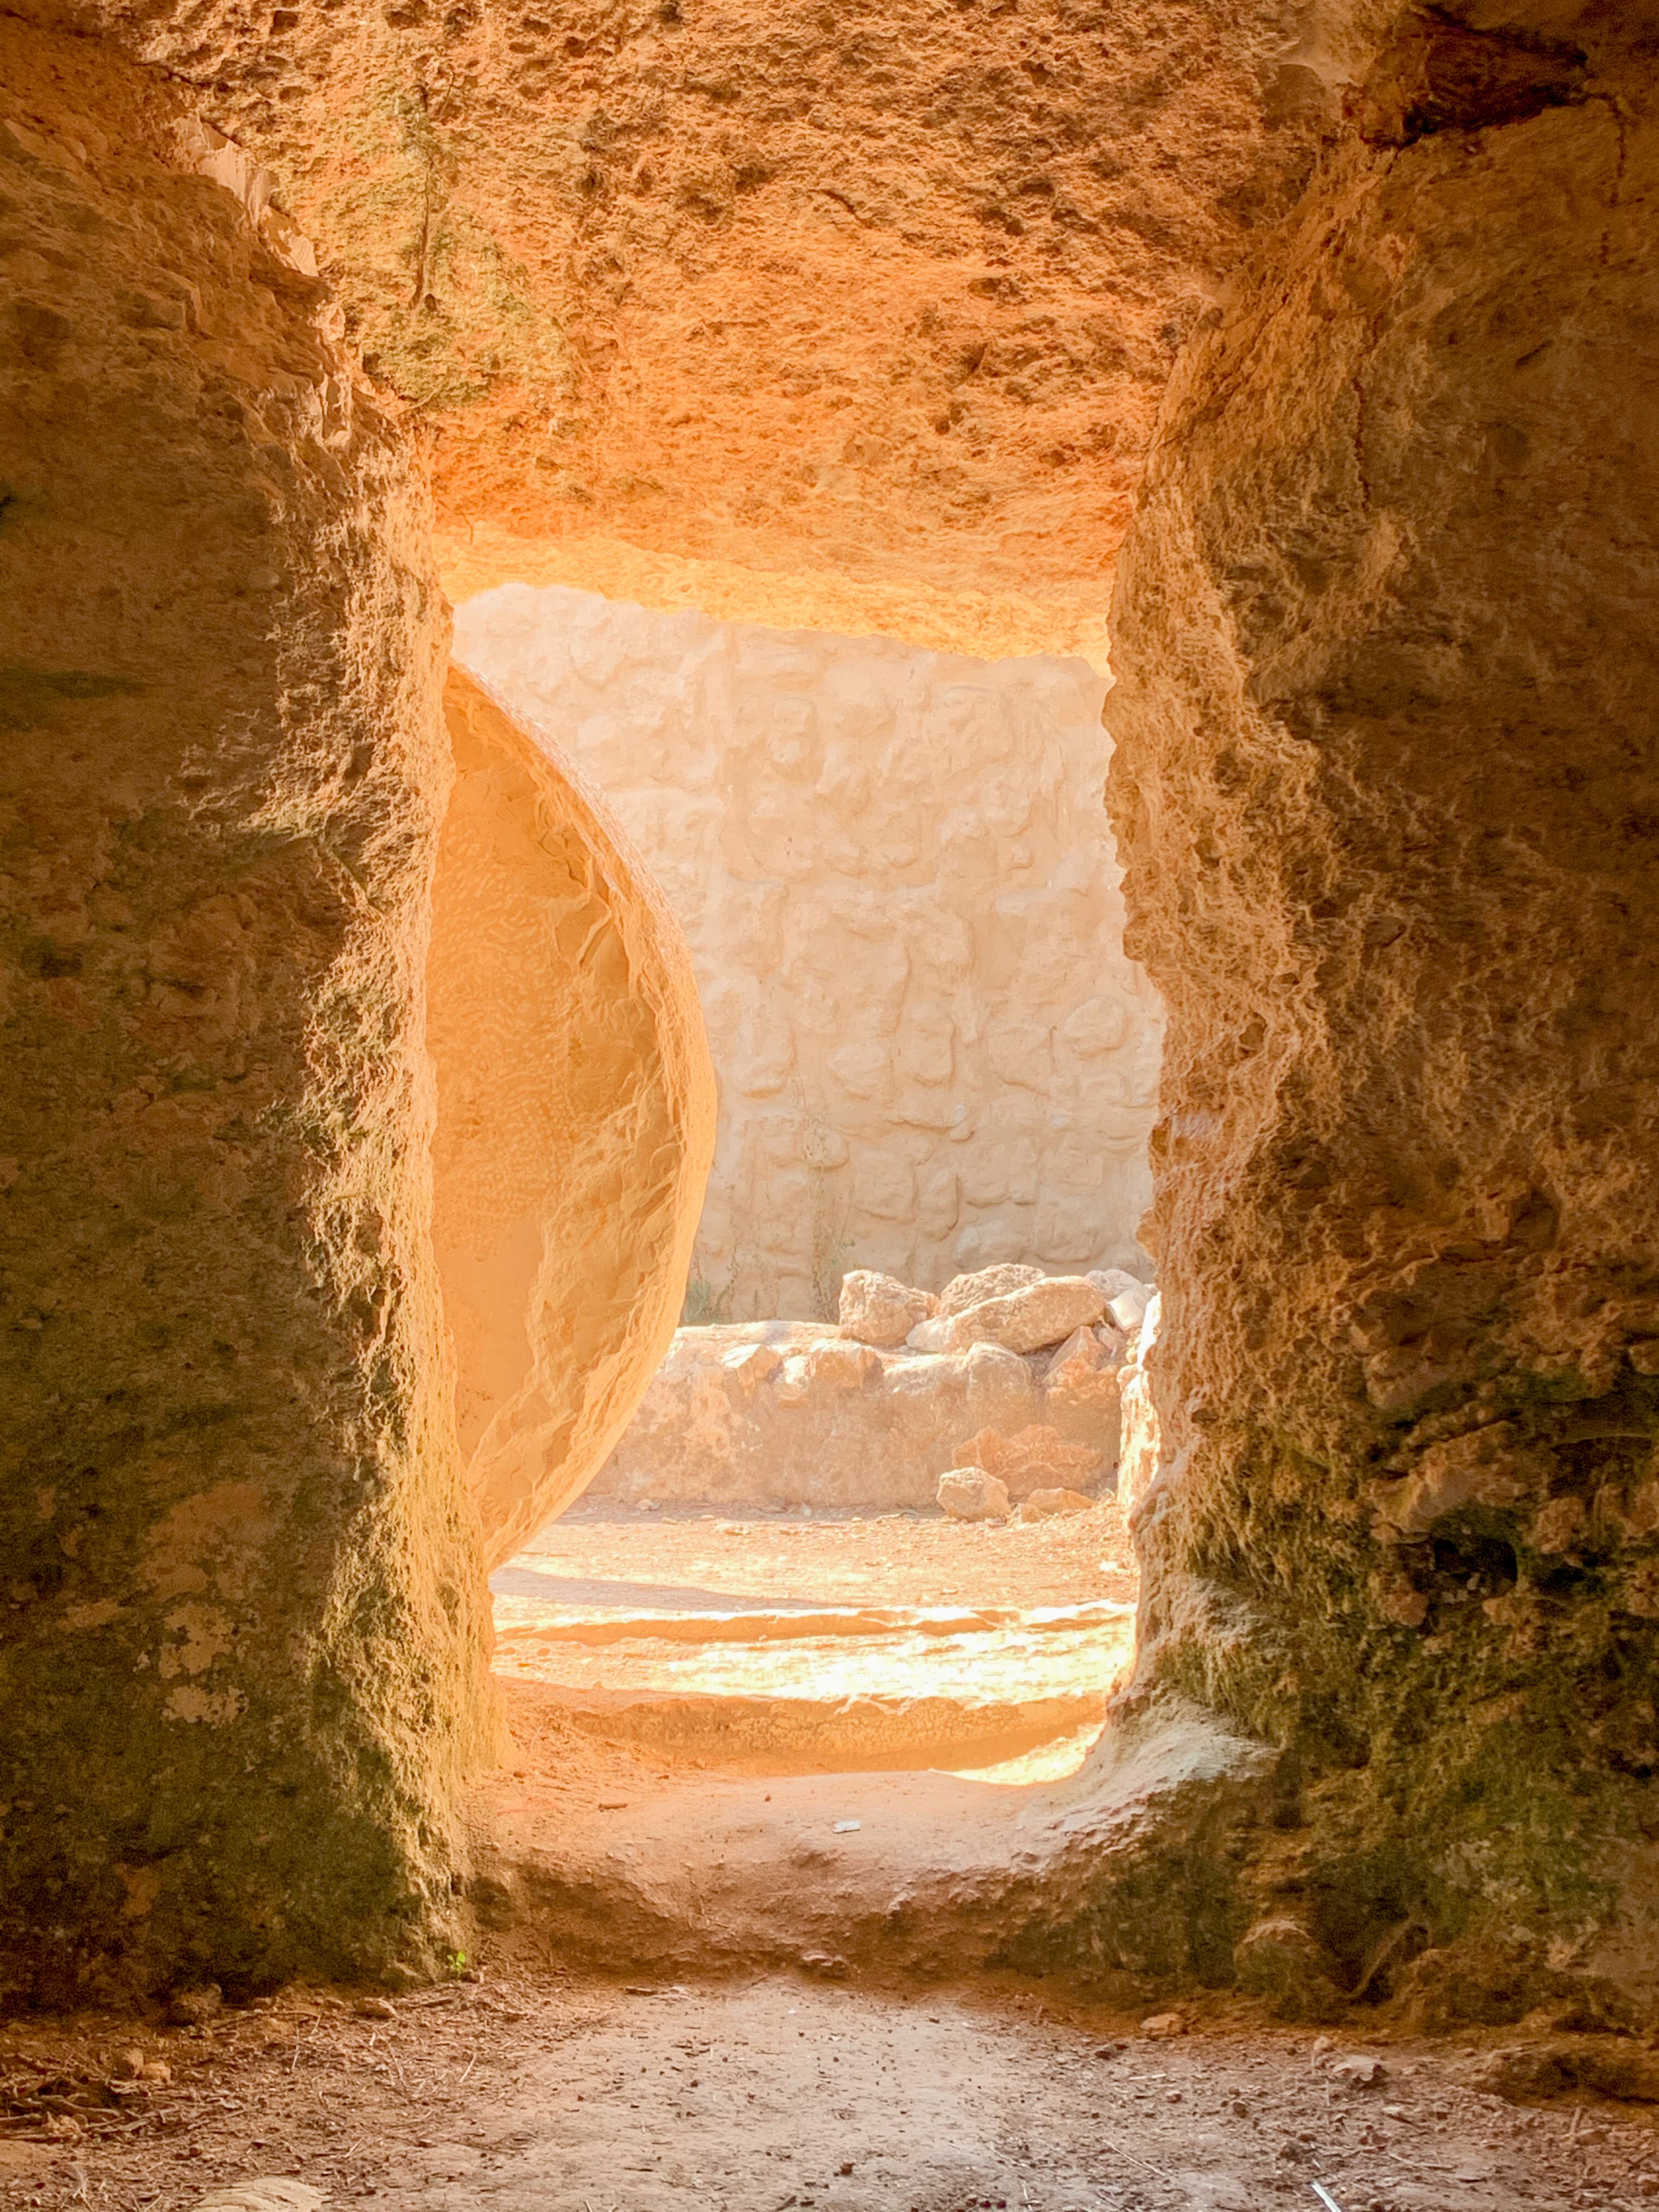 Why does it matter that Jesus rose bodily from the grave?